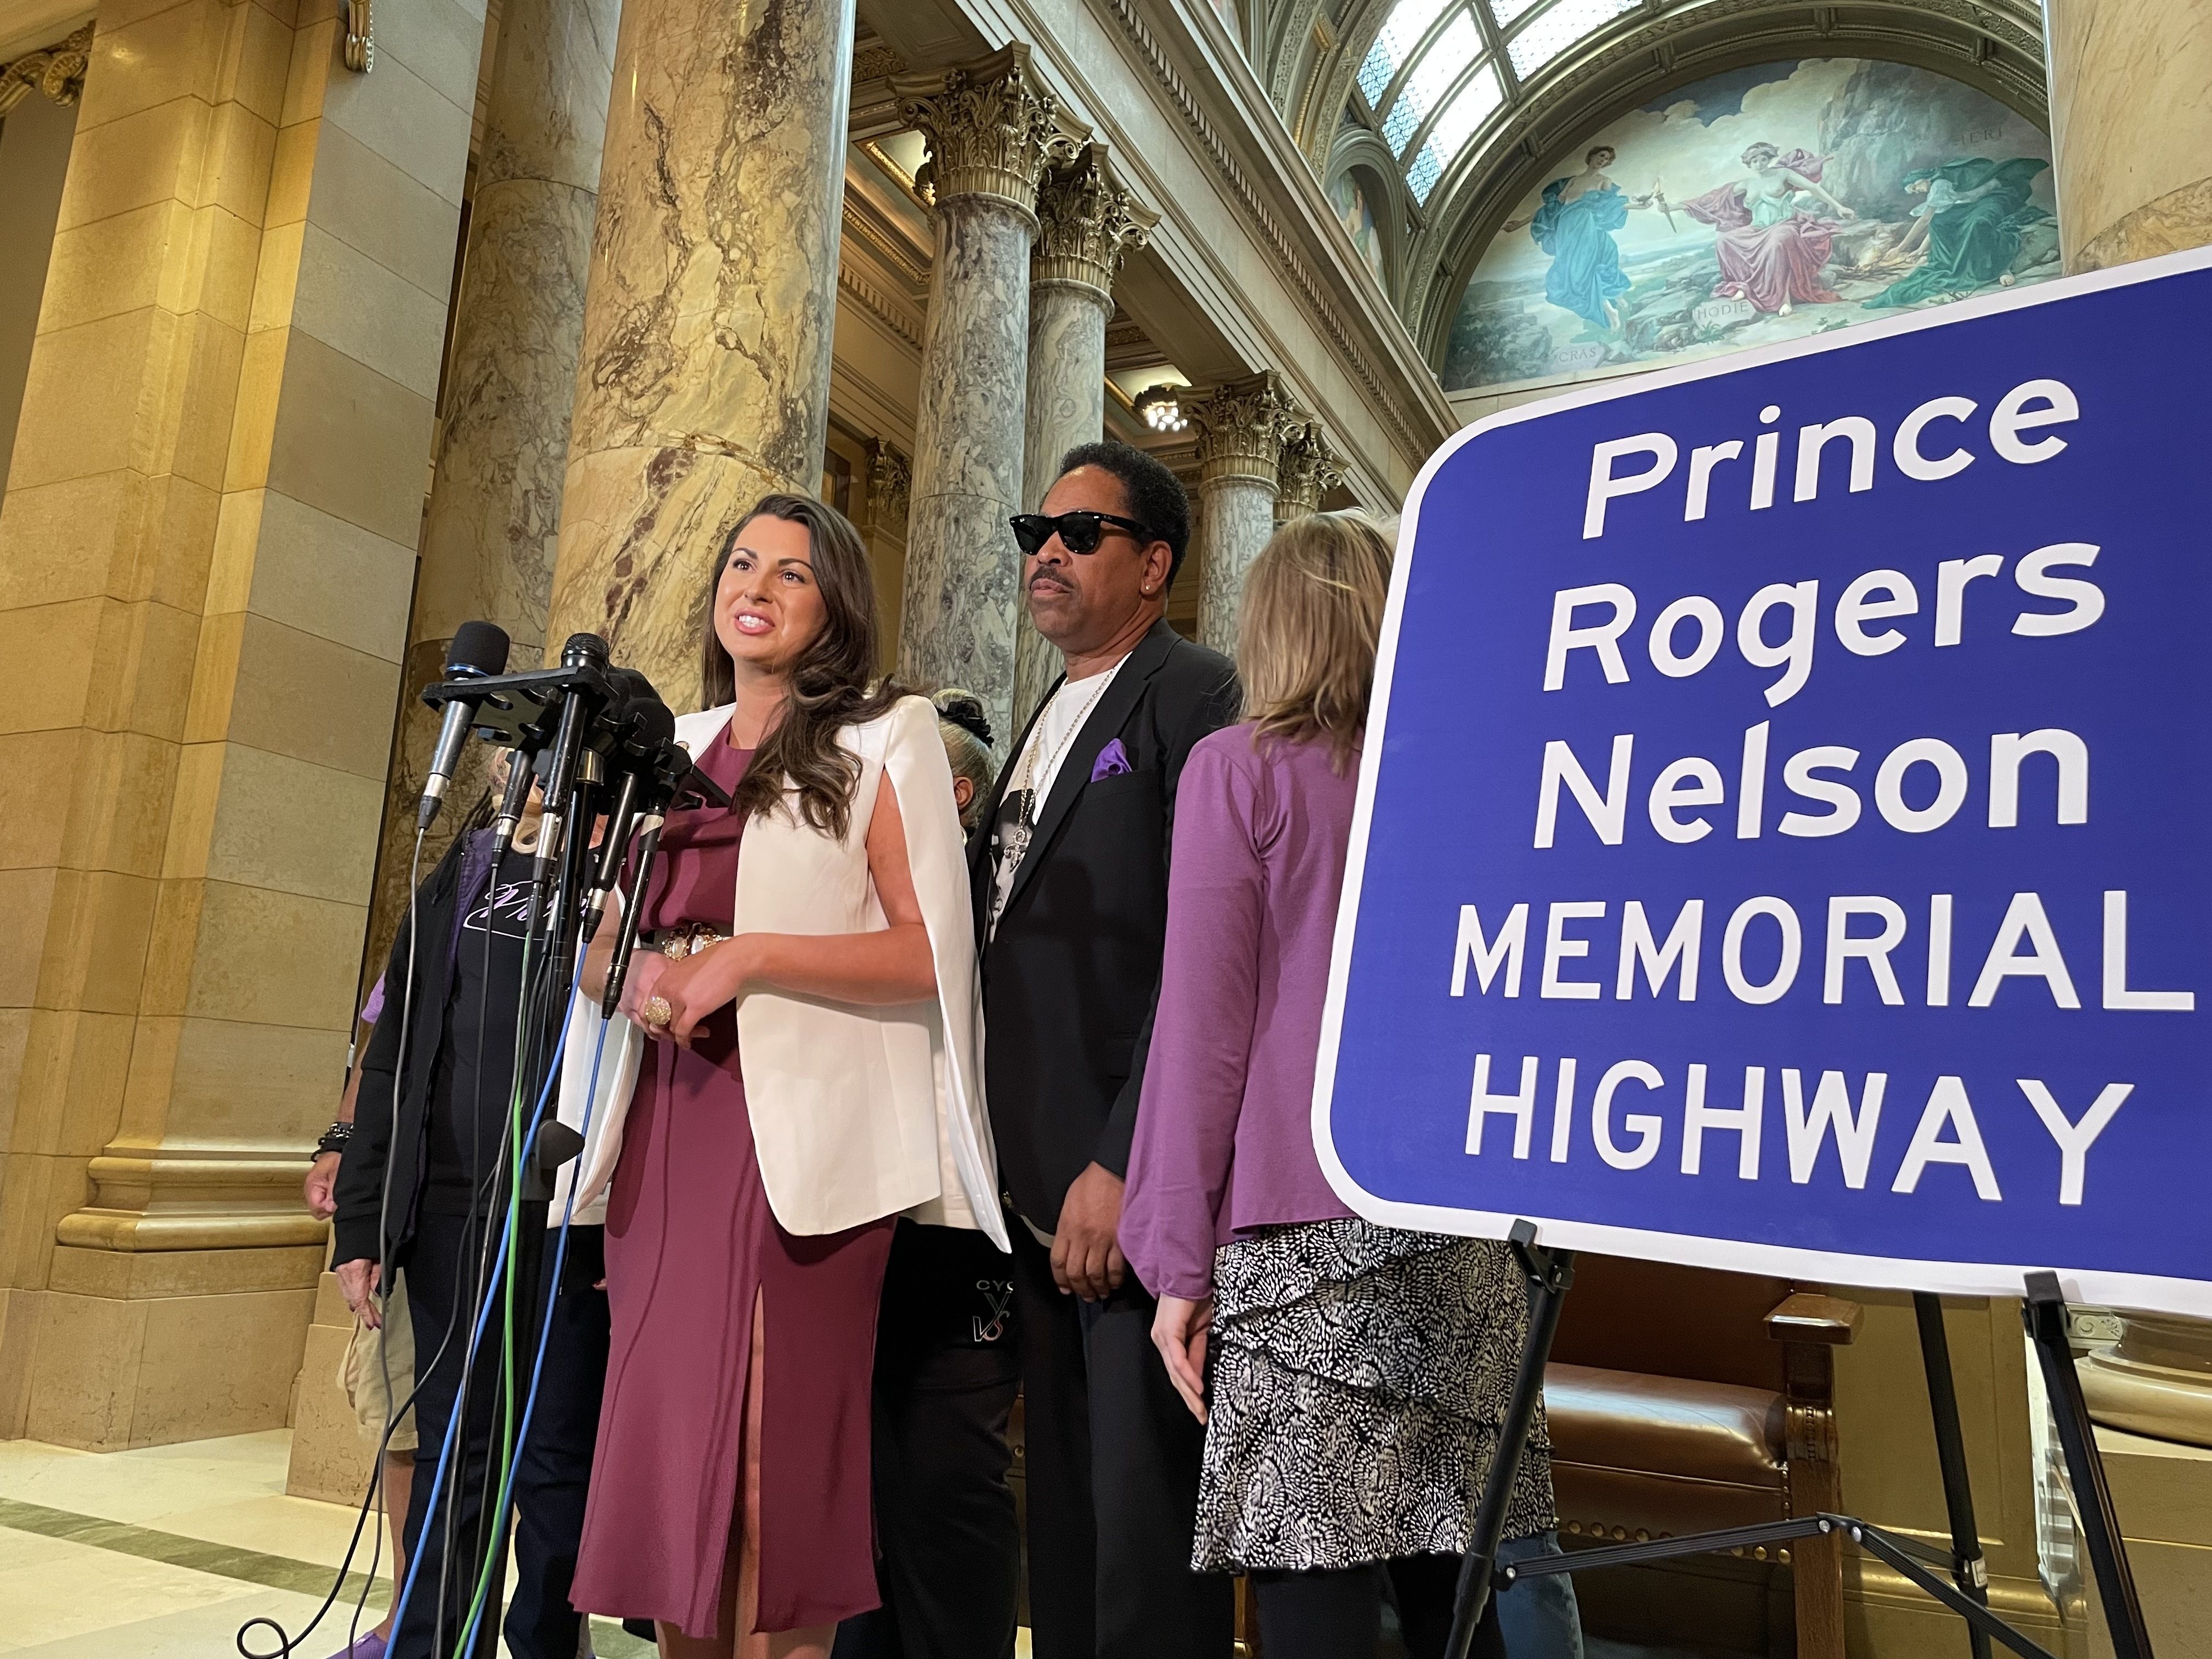 state senator in a urple dress and white jacket stands at a microphone in front of a prince highway sign